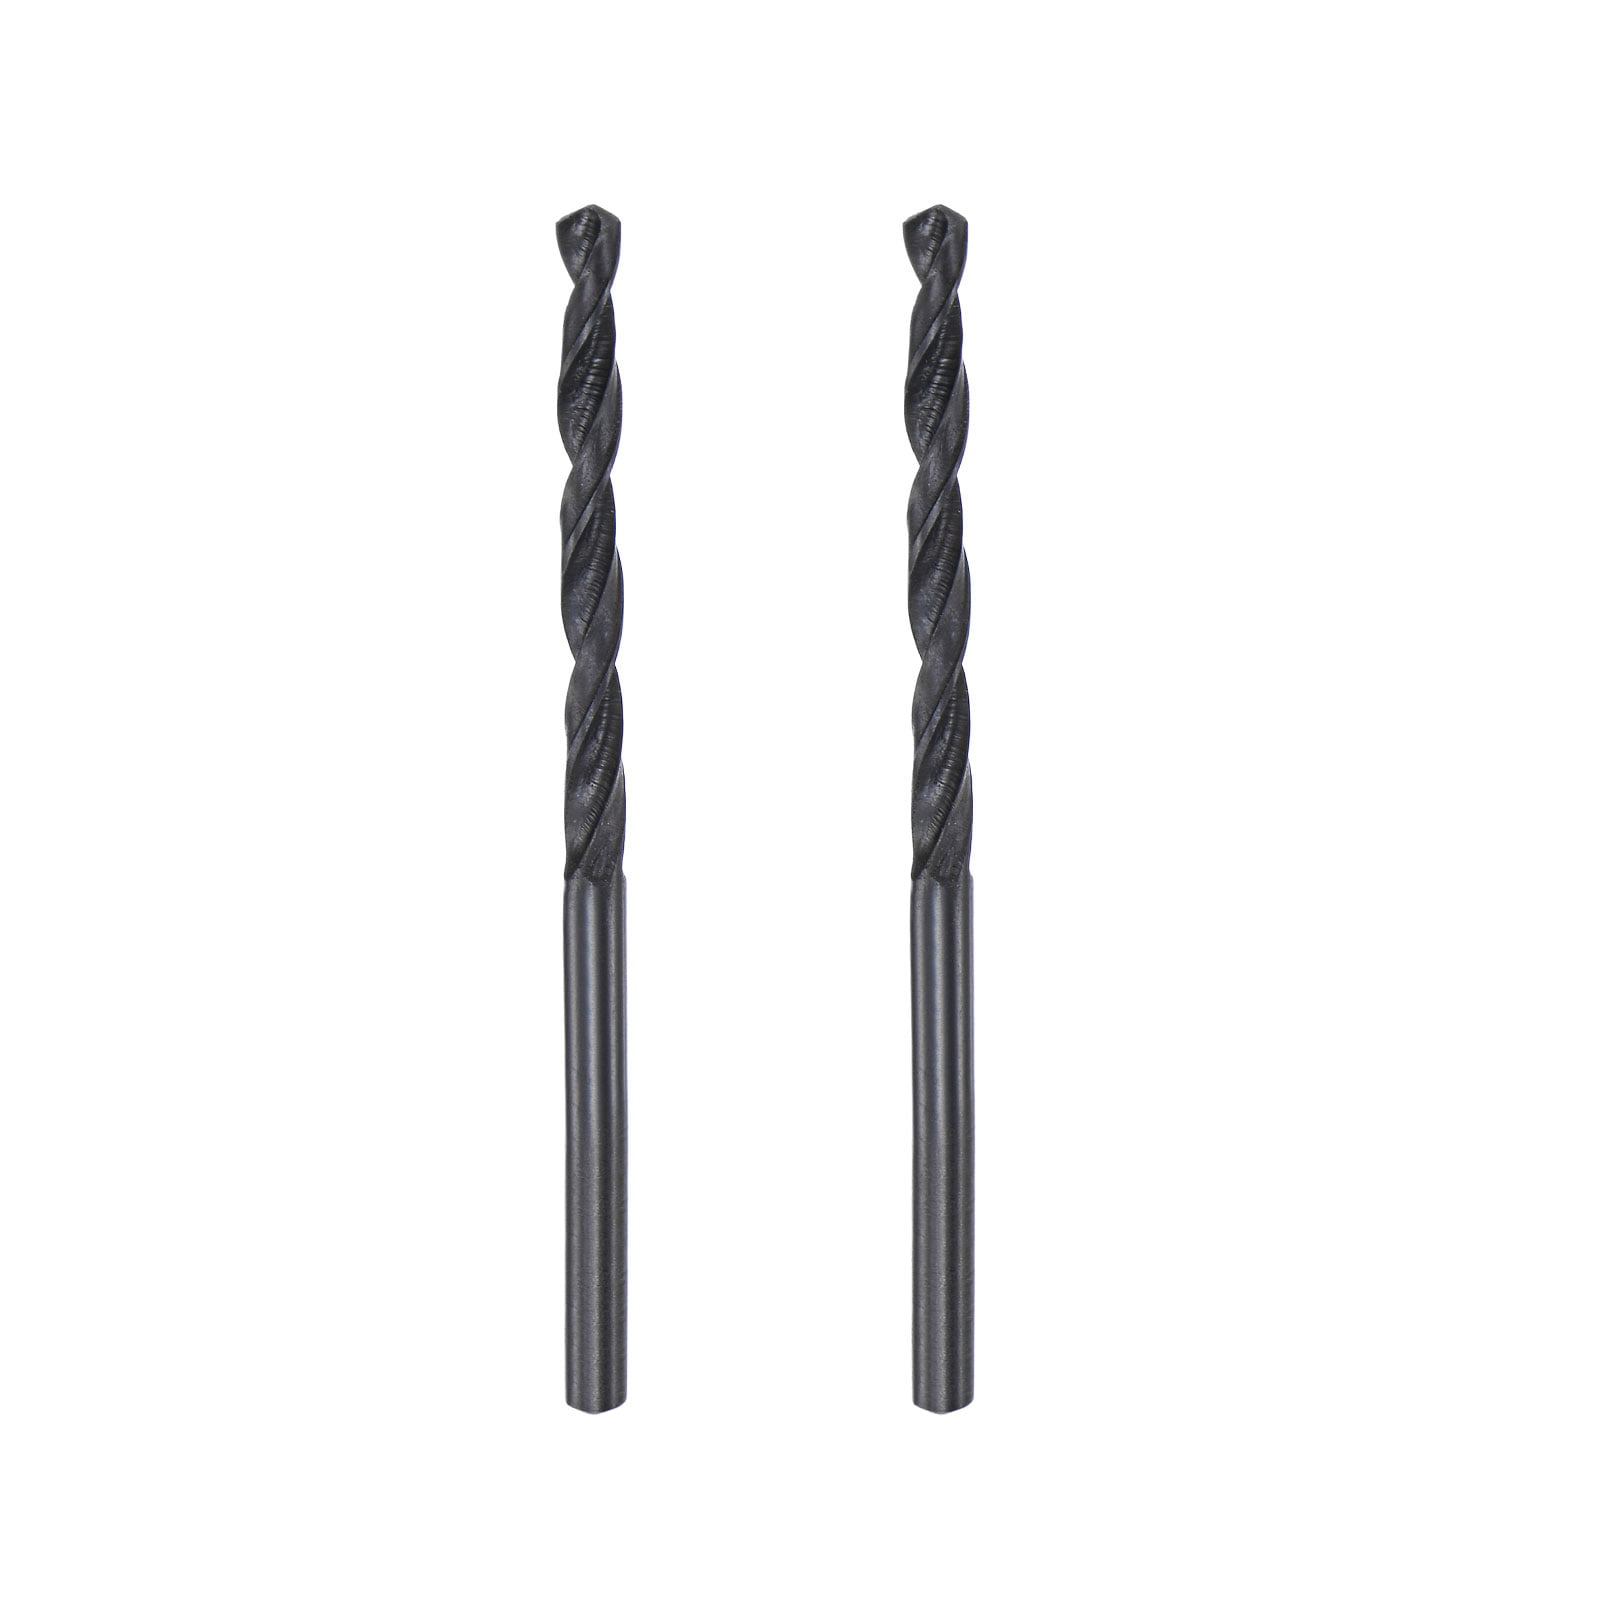 uxcell Reduced Shank Twist Drill Bits 2mm High Speed Steel 6542 with 2mm Shank 5 Pcs 